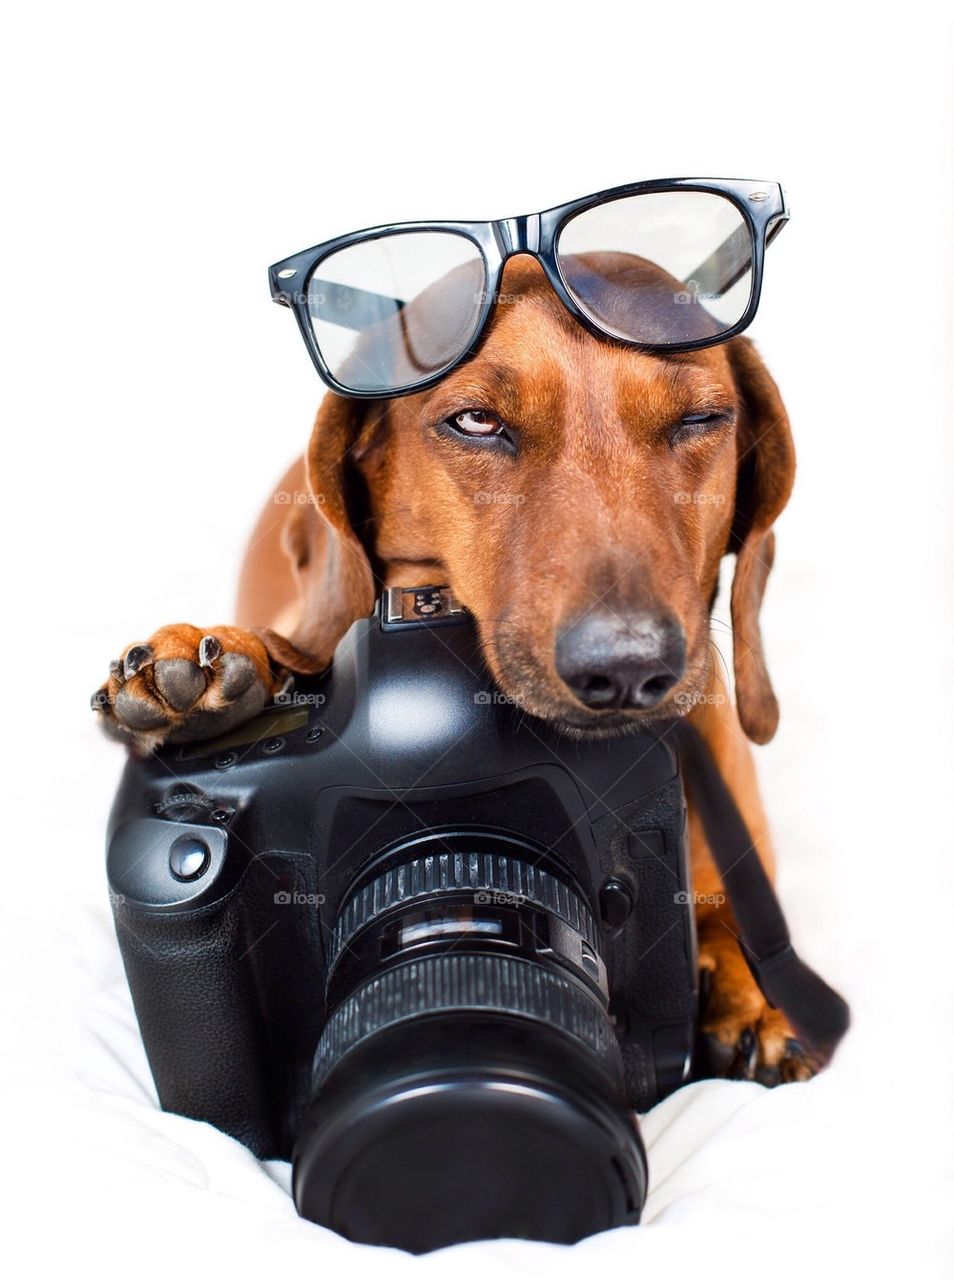 Cute dog with camera